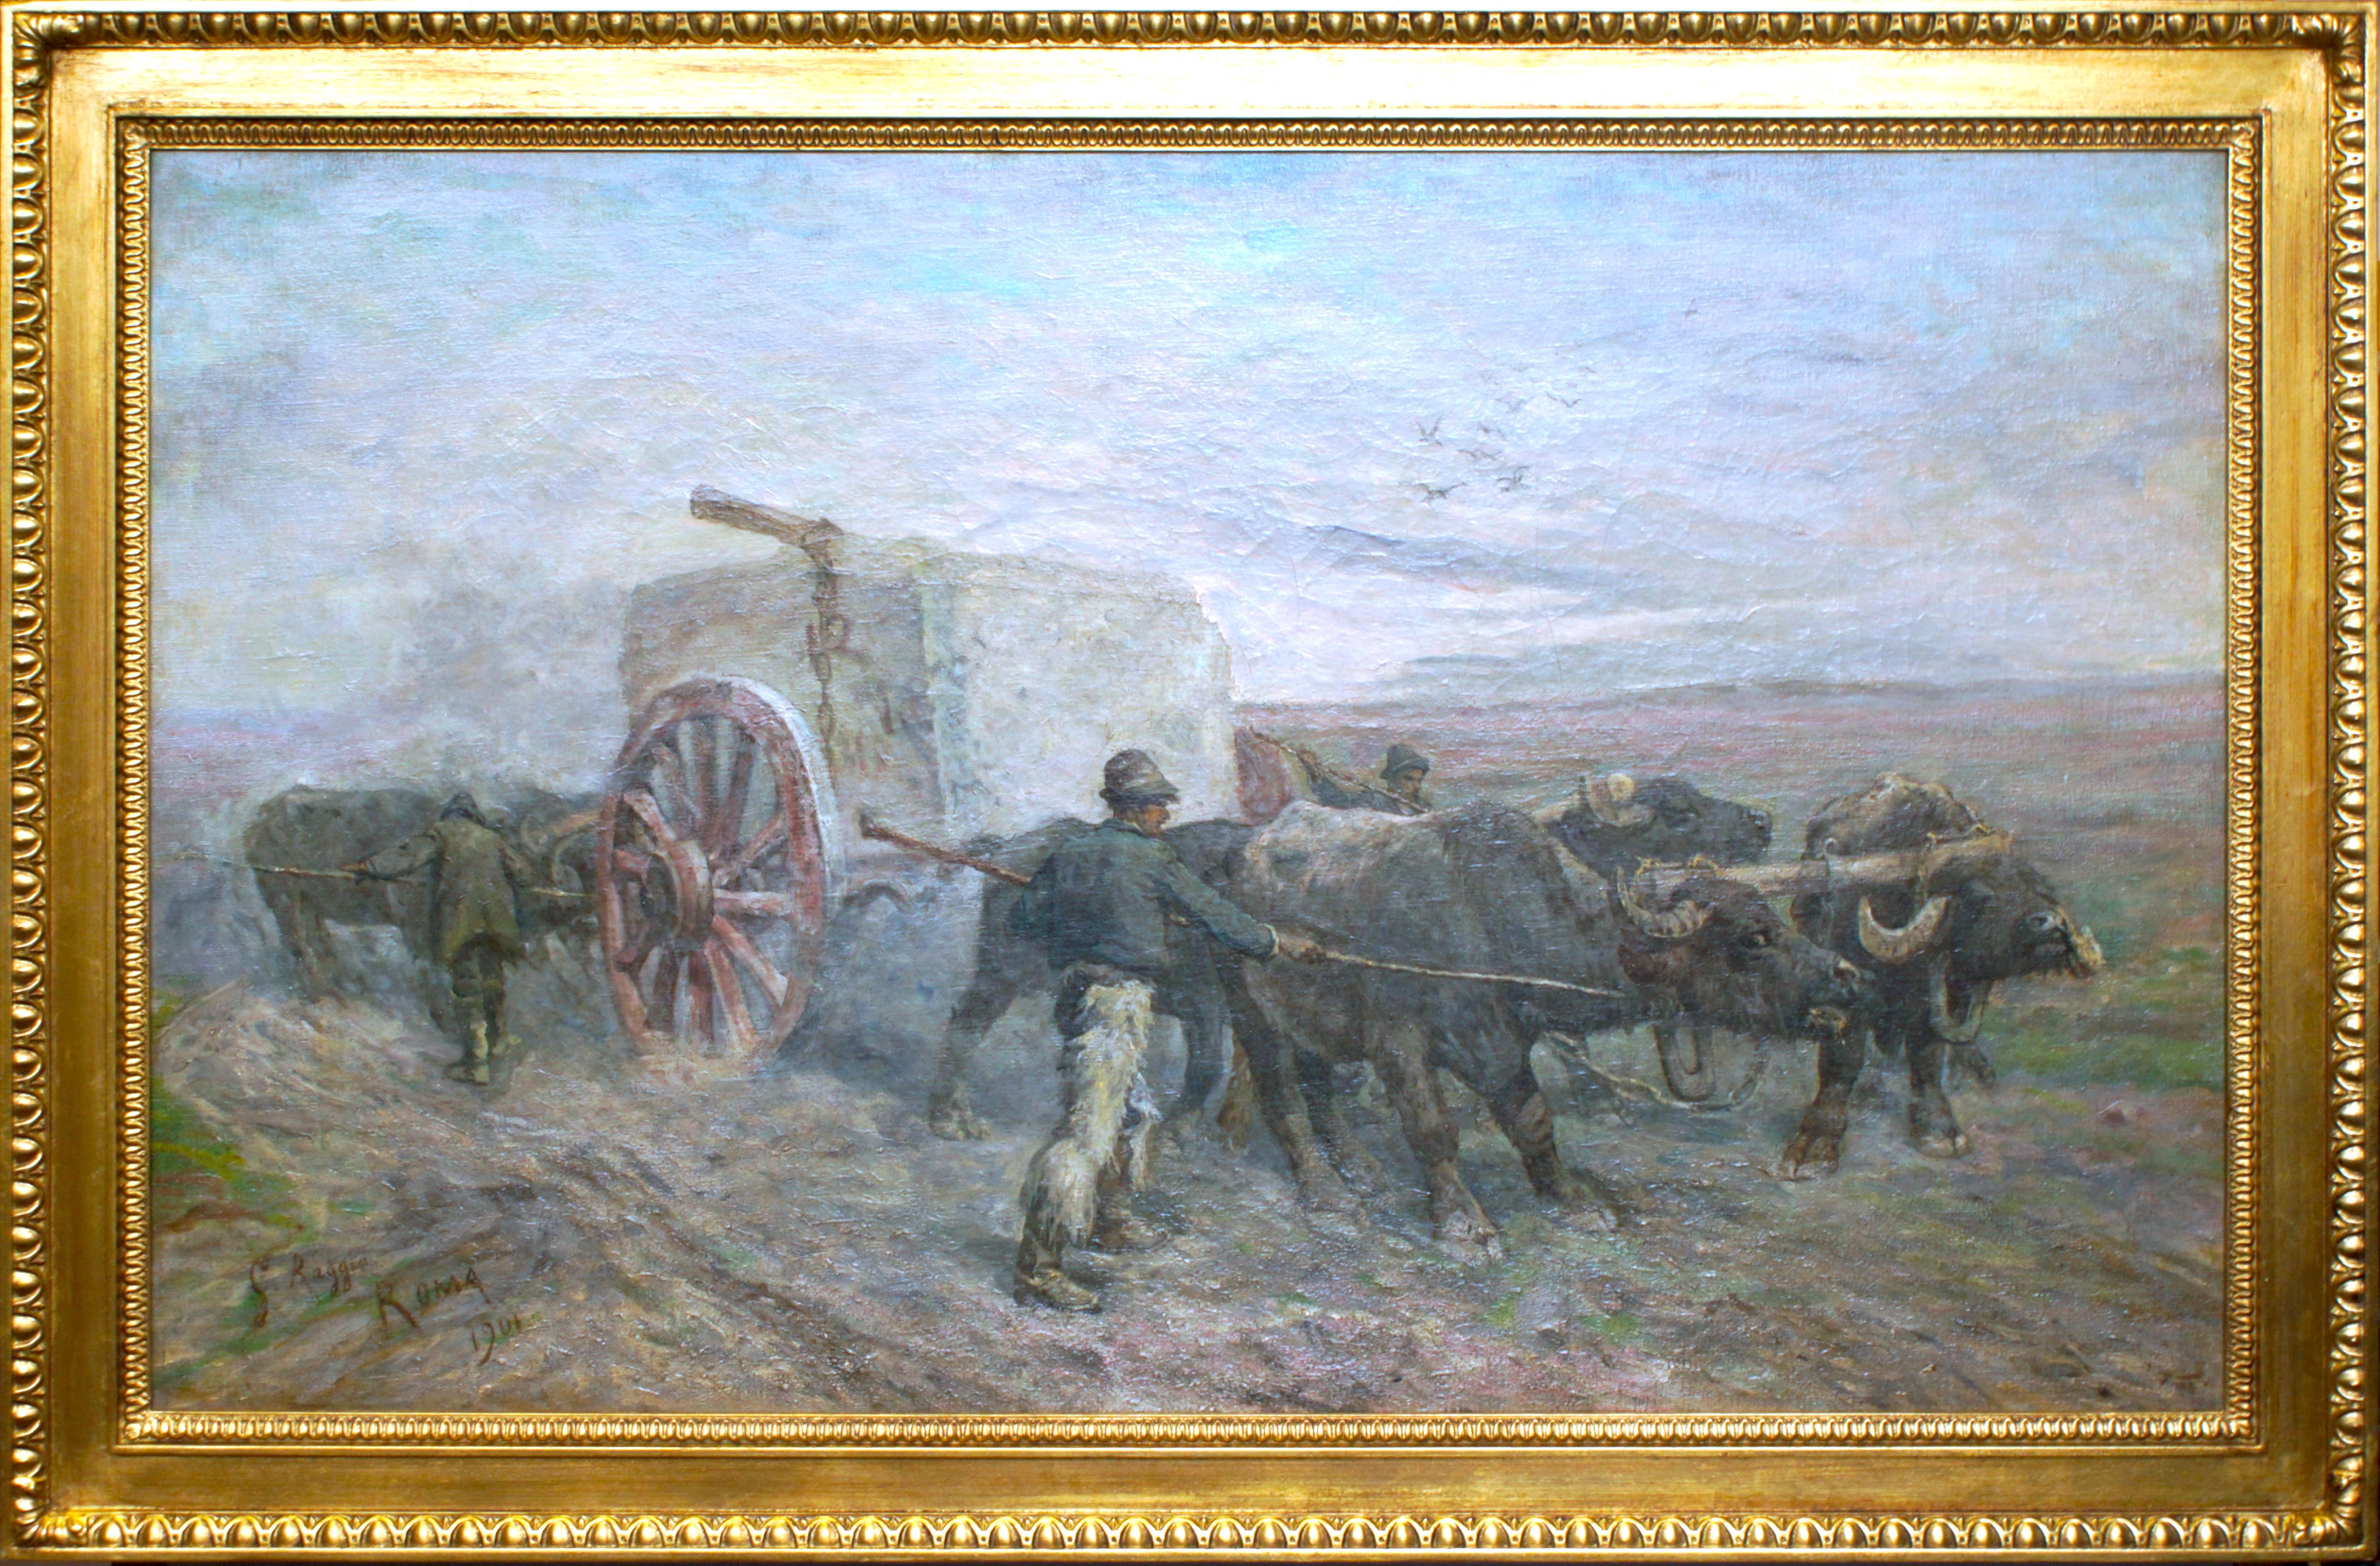 Carriage of Travertine - Oil on Canvas by Giuseppe Raggio - 1901